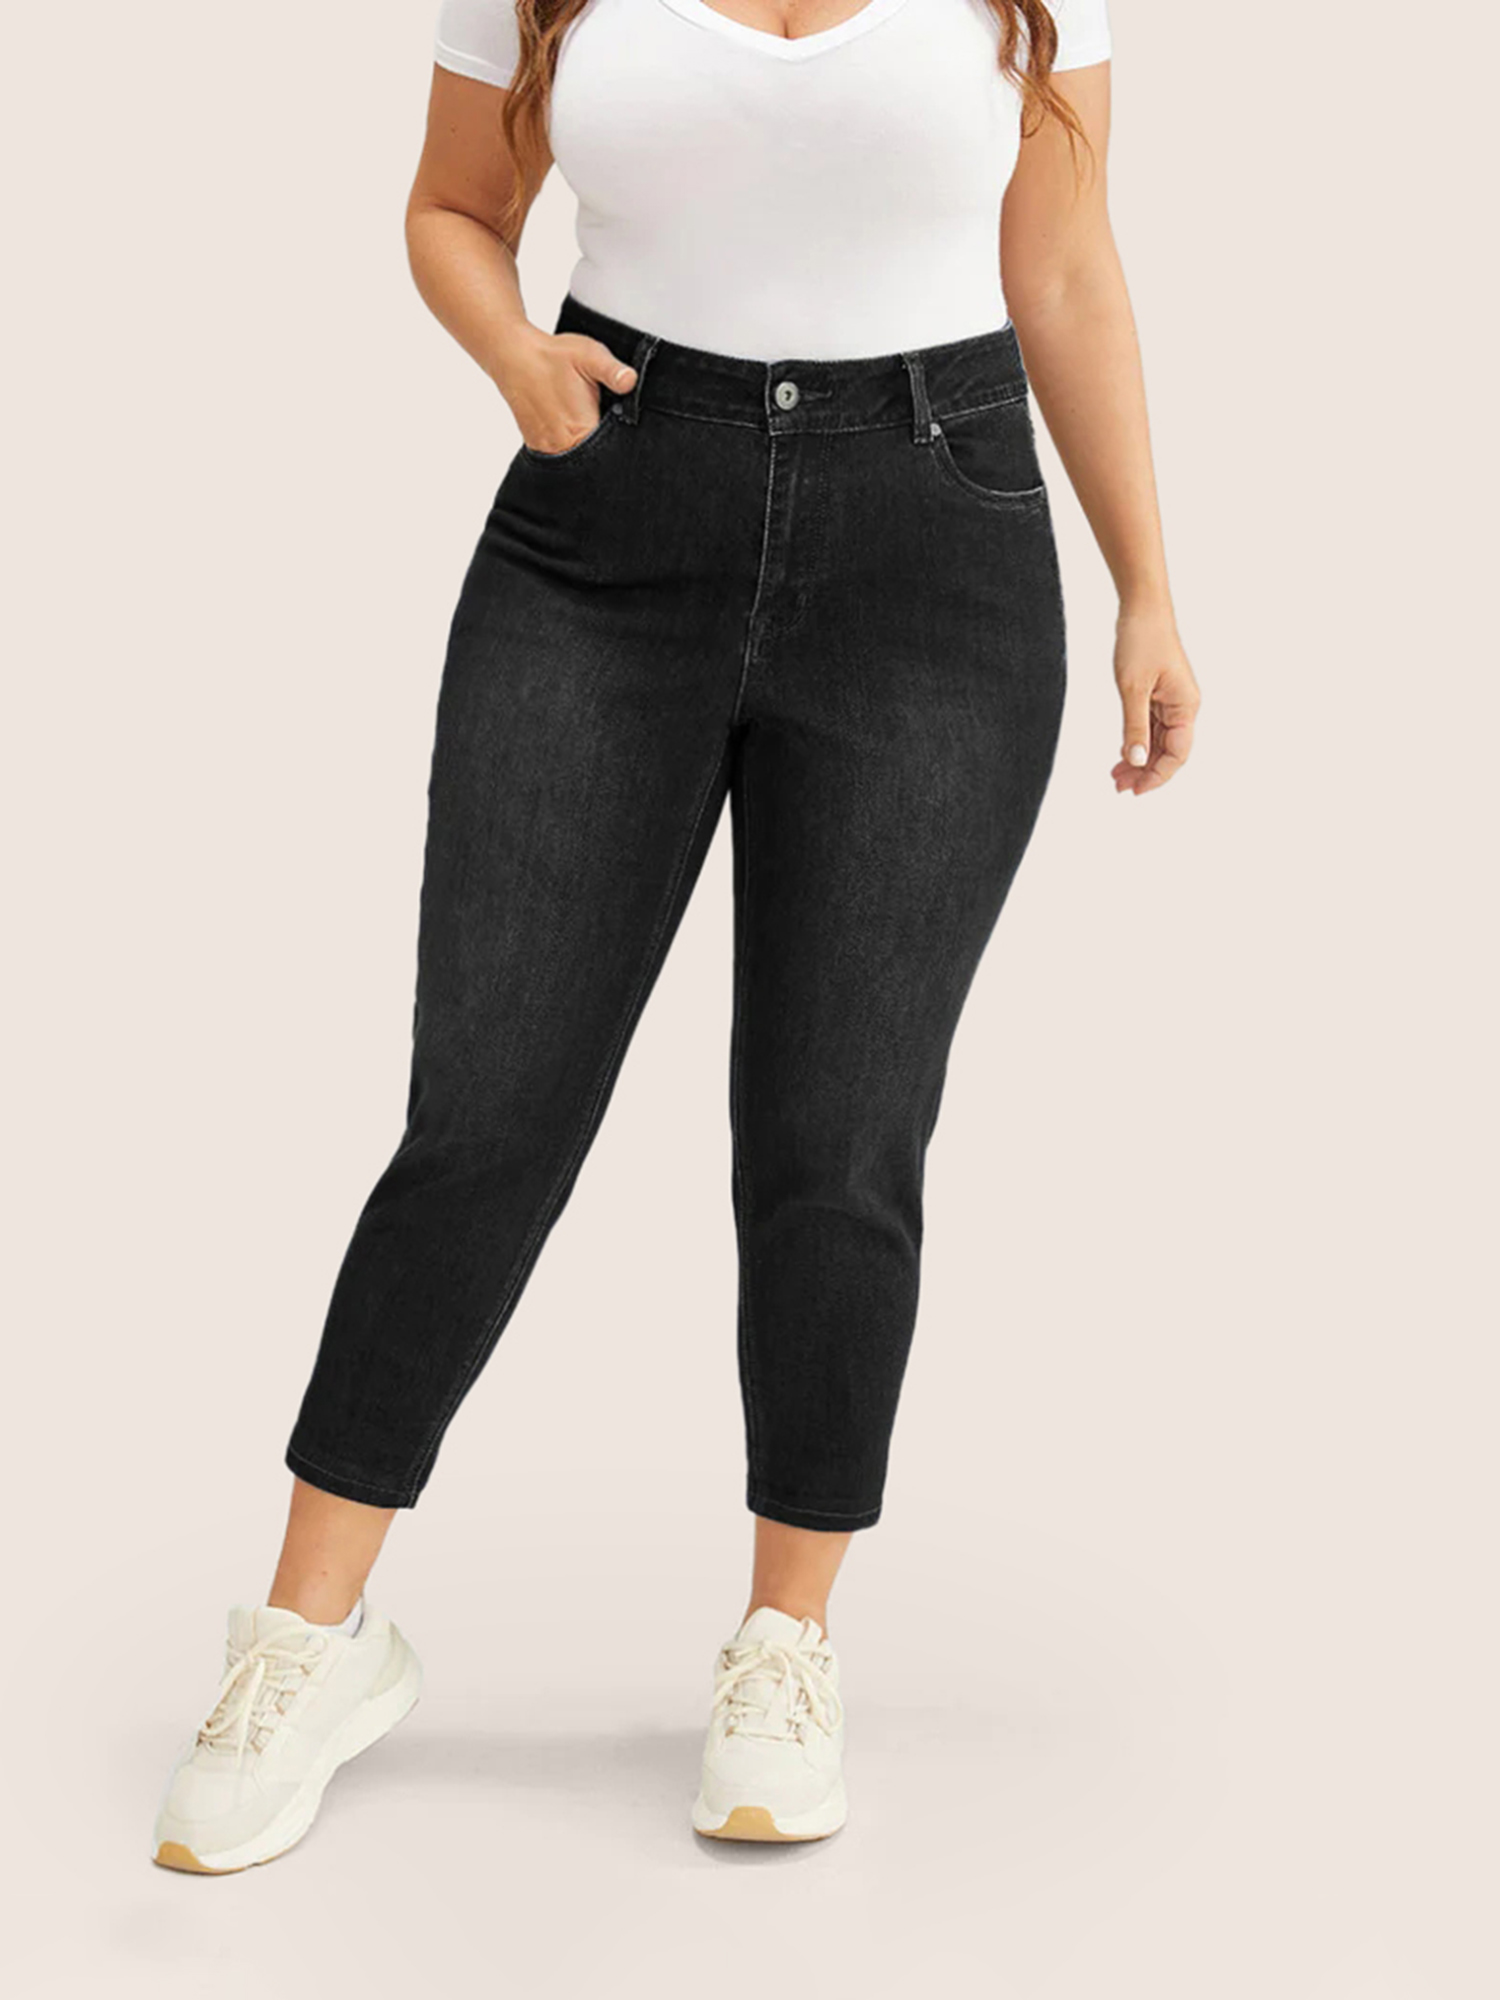 

Plus Size Very Stretchy High Rise Dark Wash Cropped Jeans Women Black Casual Plain High stretch Slanted pocket Jeans BloomChic